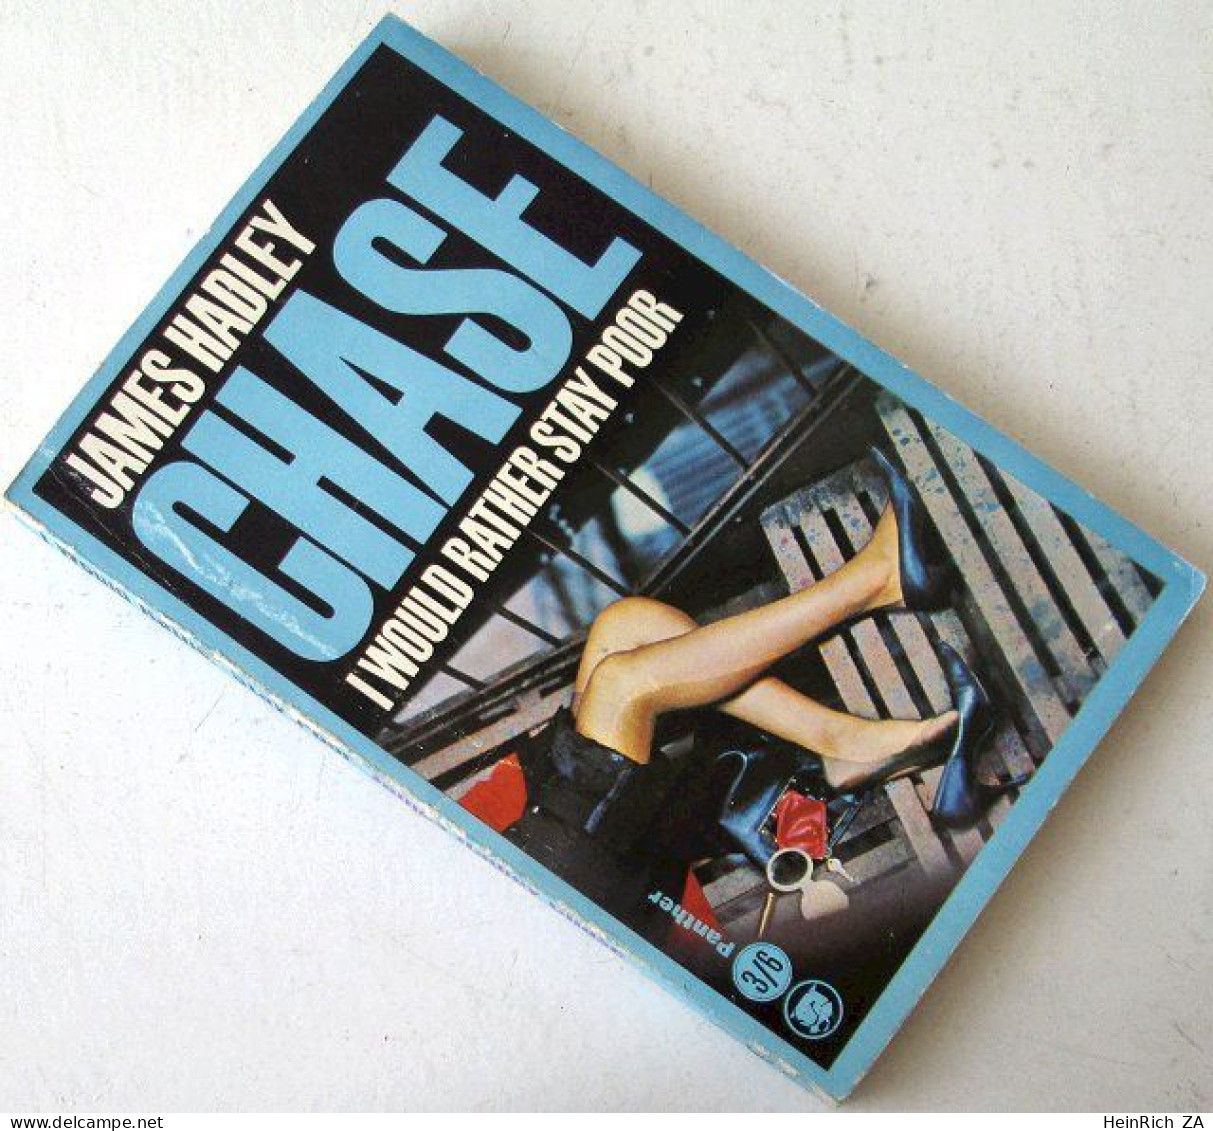 James Hadley Chase - I Would Rather Stay Poor - Criminalistiek